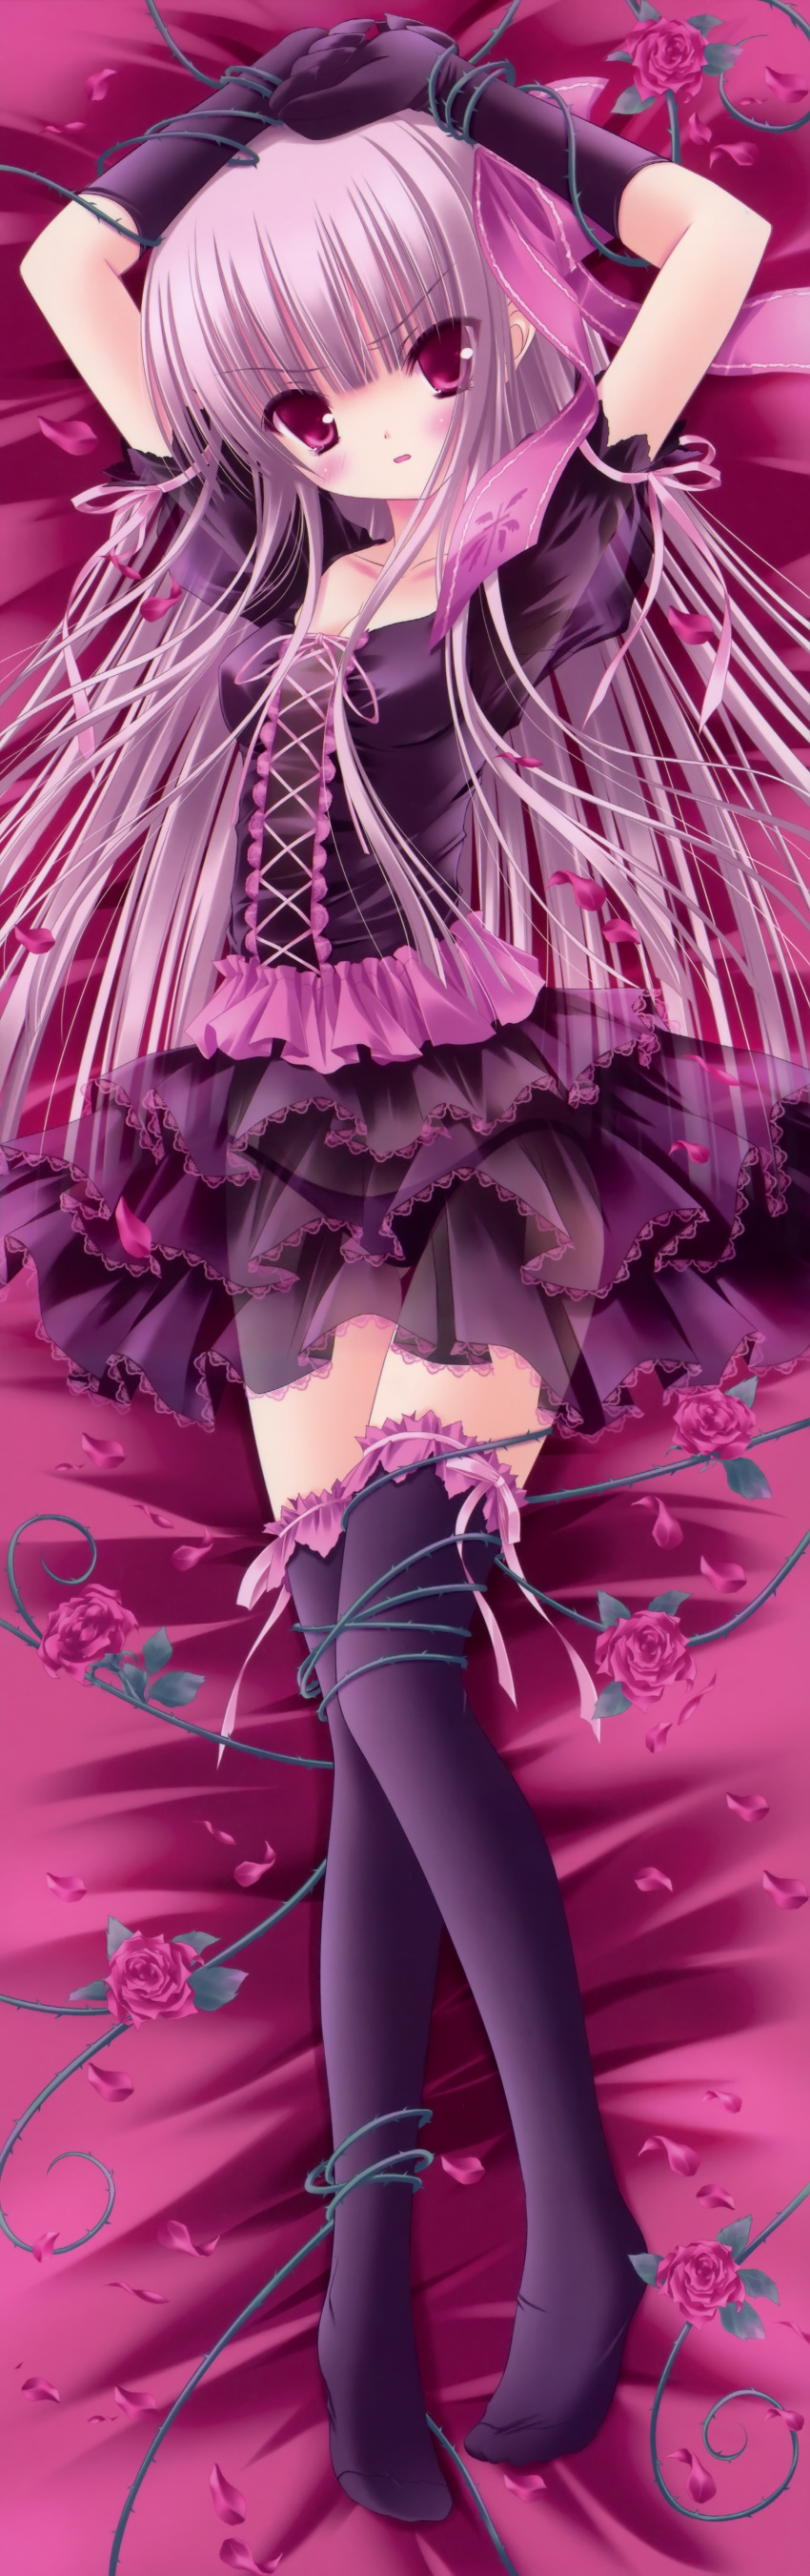 1girl black_panties blush dakimakura dress eyebrows_visible_through_hair female fixed flower garter_belt hands_above_head hands_on_own_head lolita_fashion long_hair looking_at_viewer lying panties purple_eyes purple_hair red_flower rose rose_petals see-through solo thigh-highs thorns tied_up tinkerbell tinkle